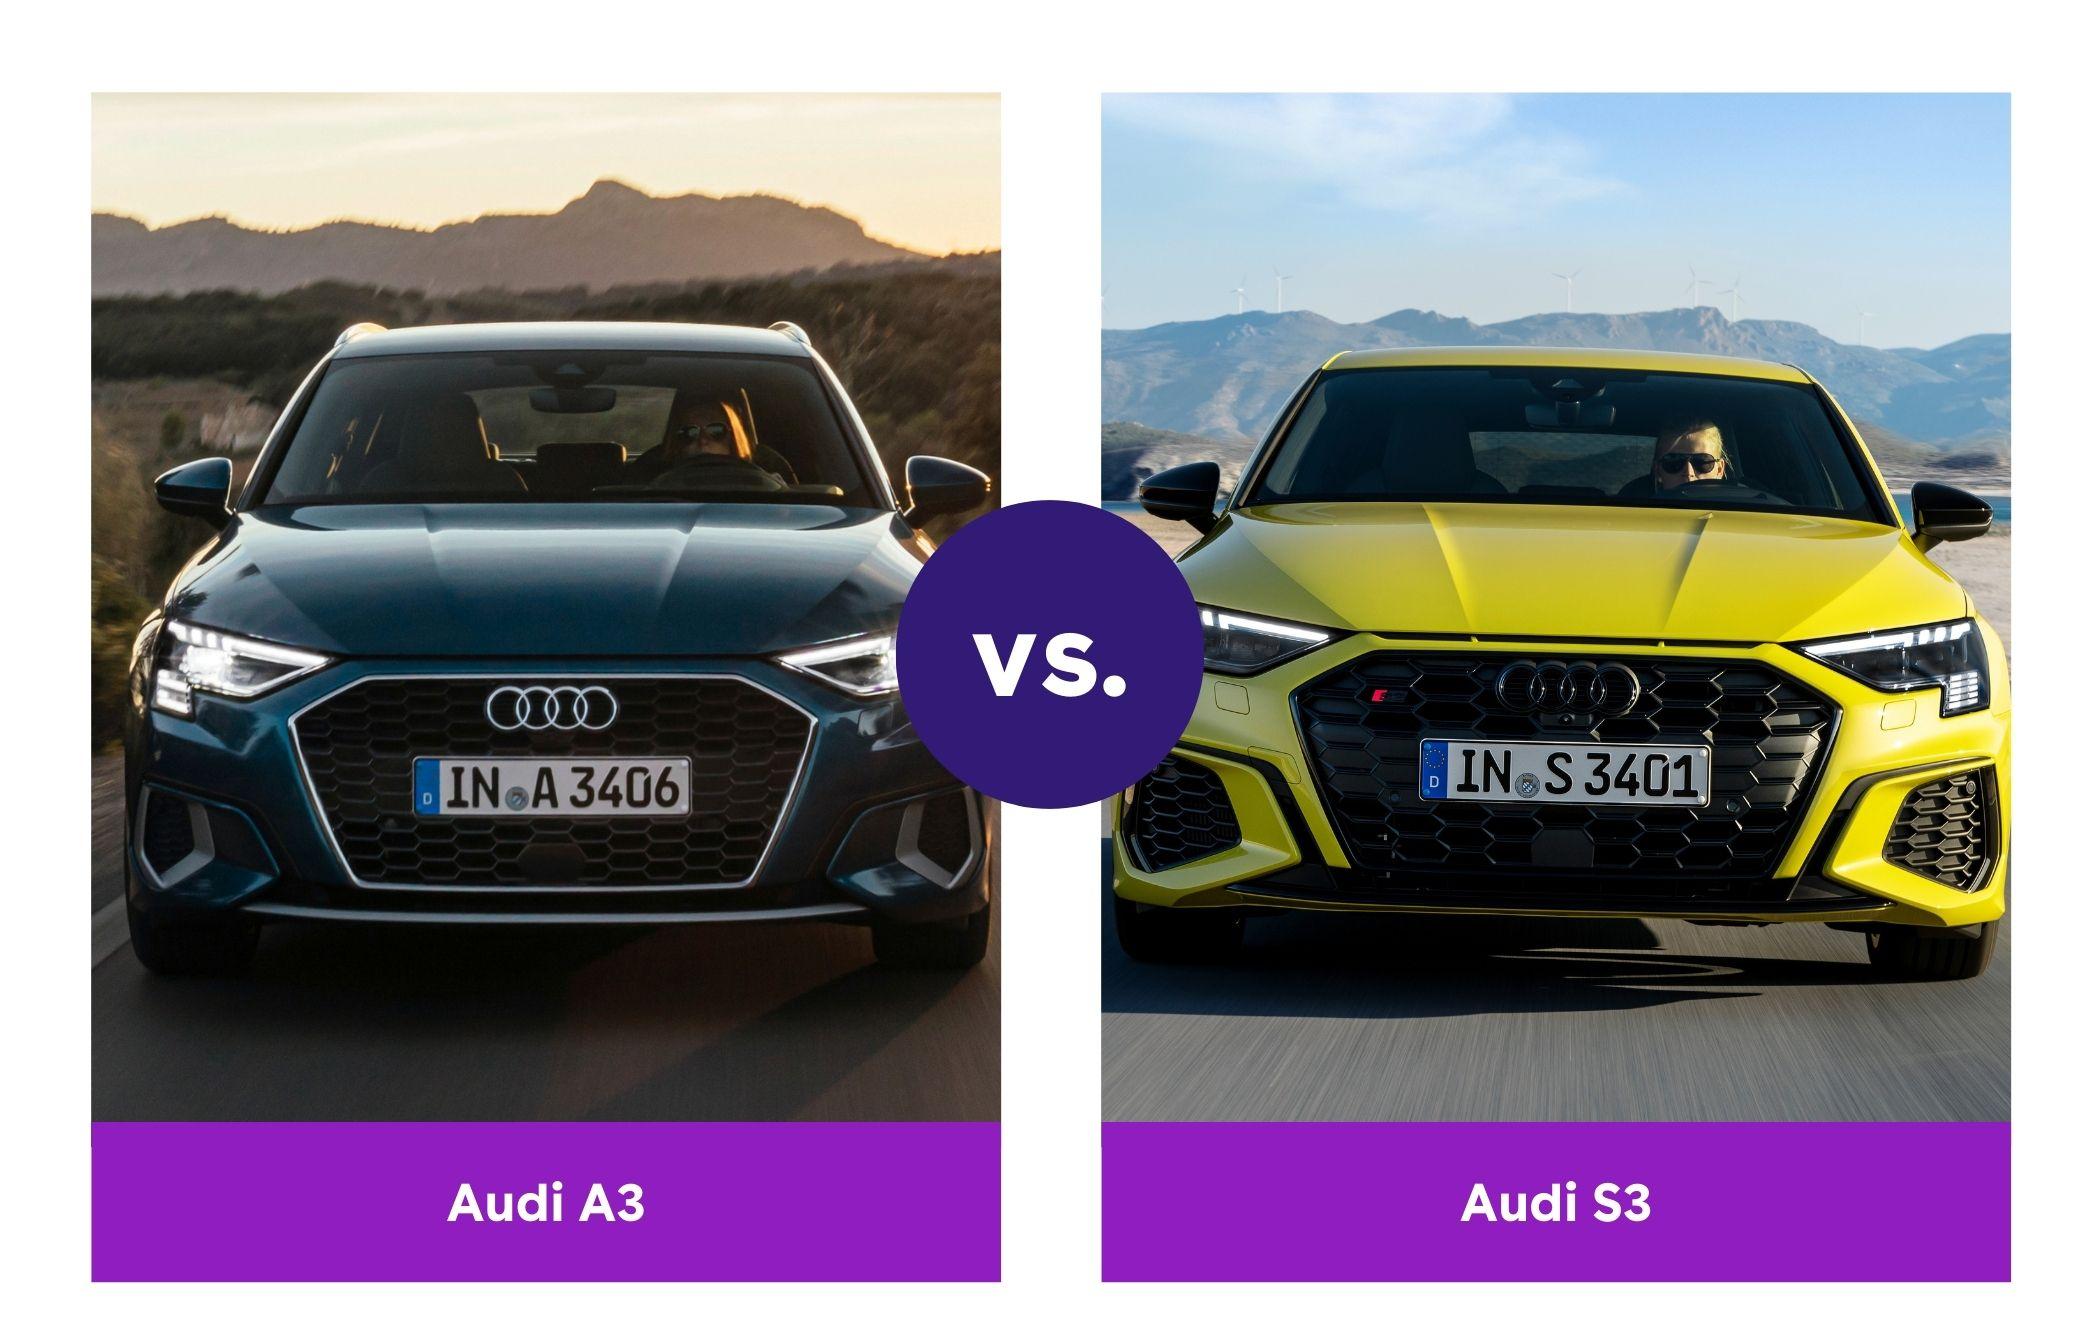 A comparison of the Audi A3 and Audi S3 models